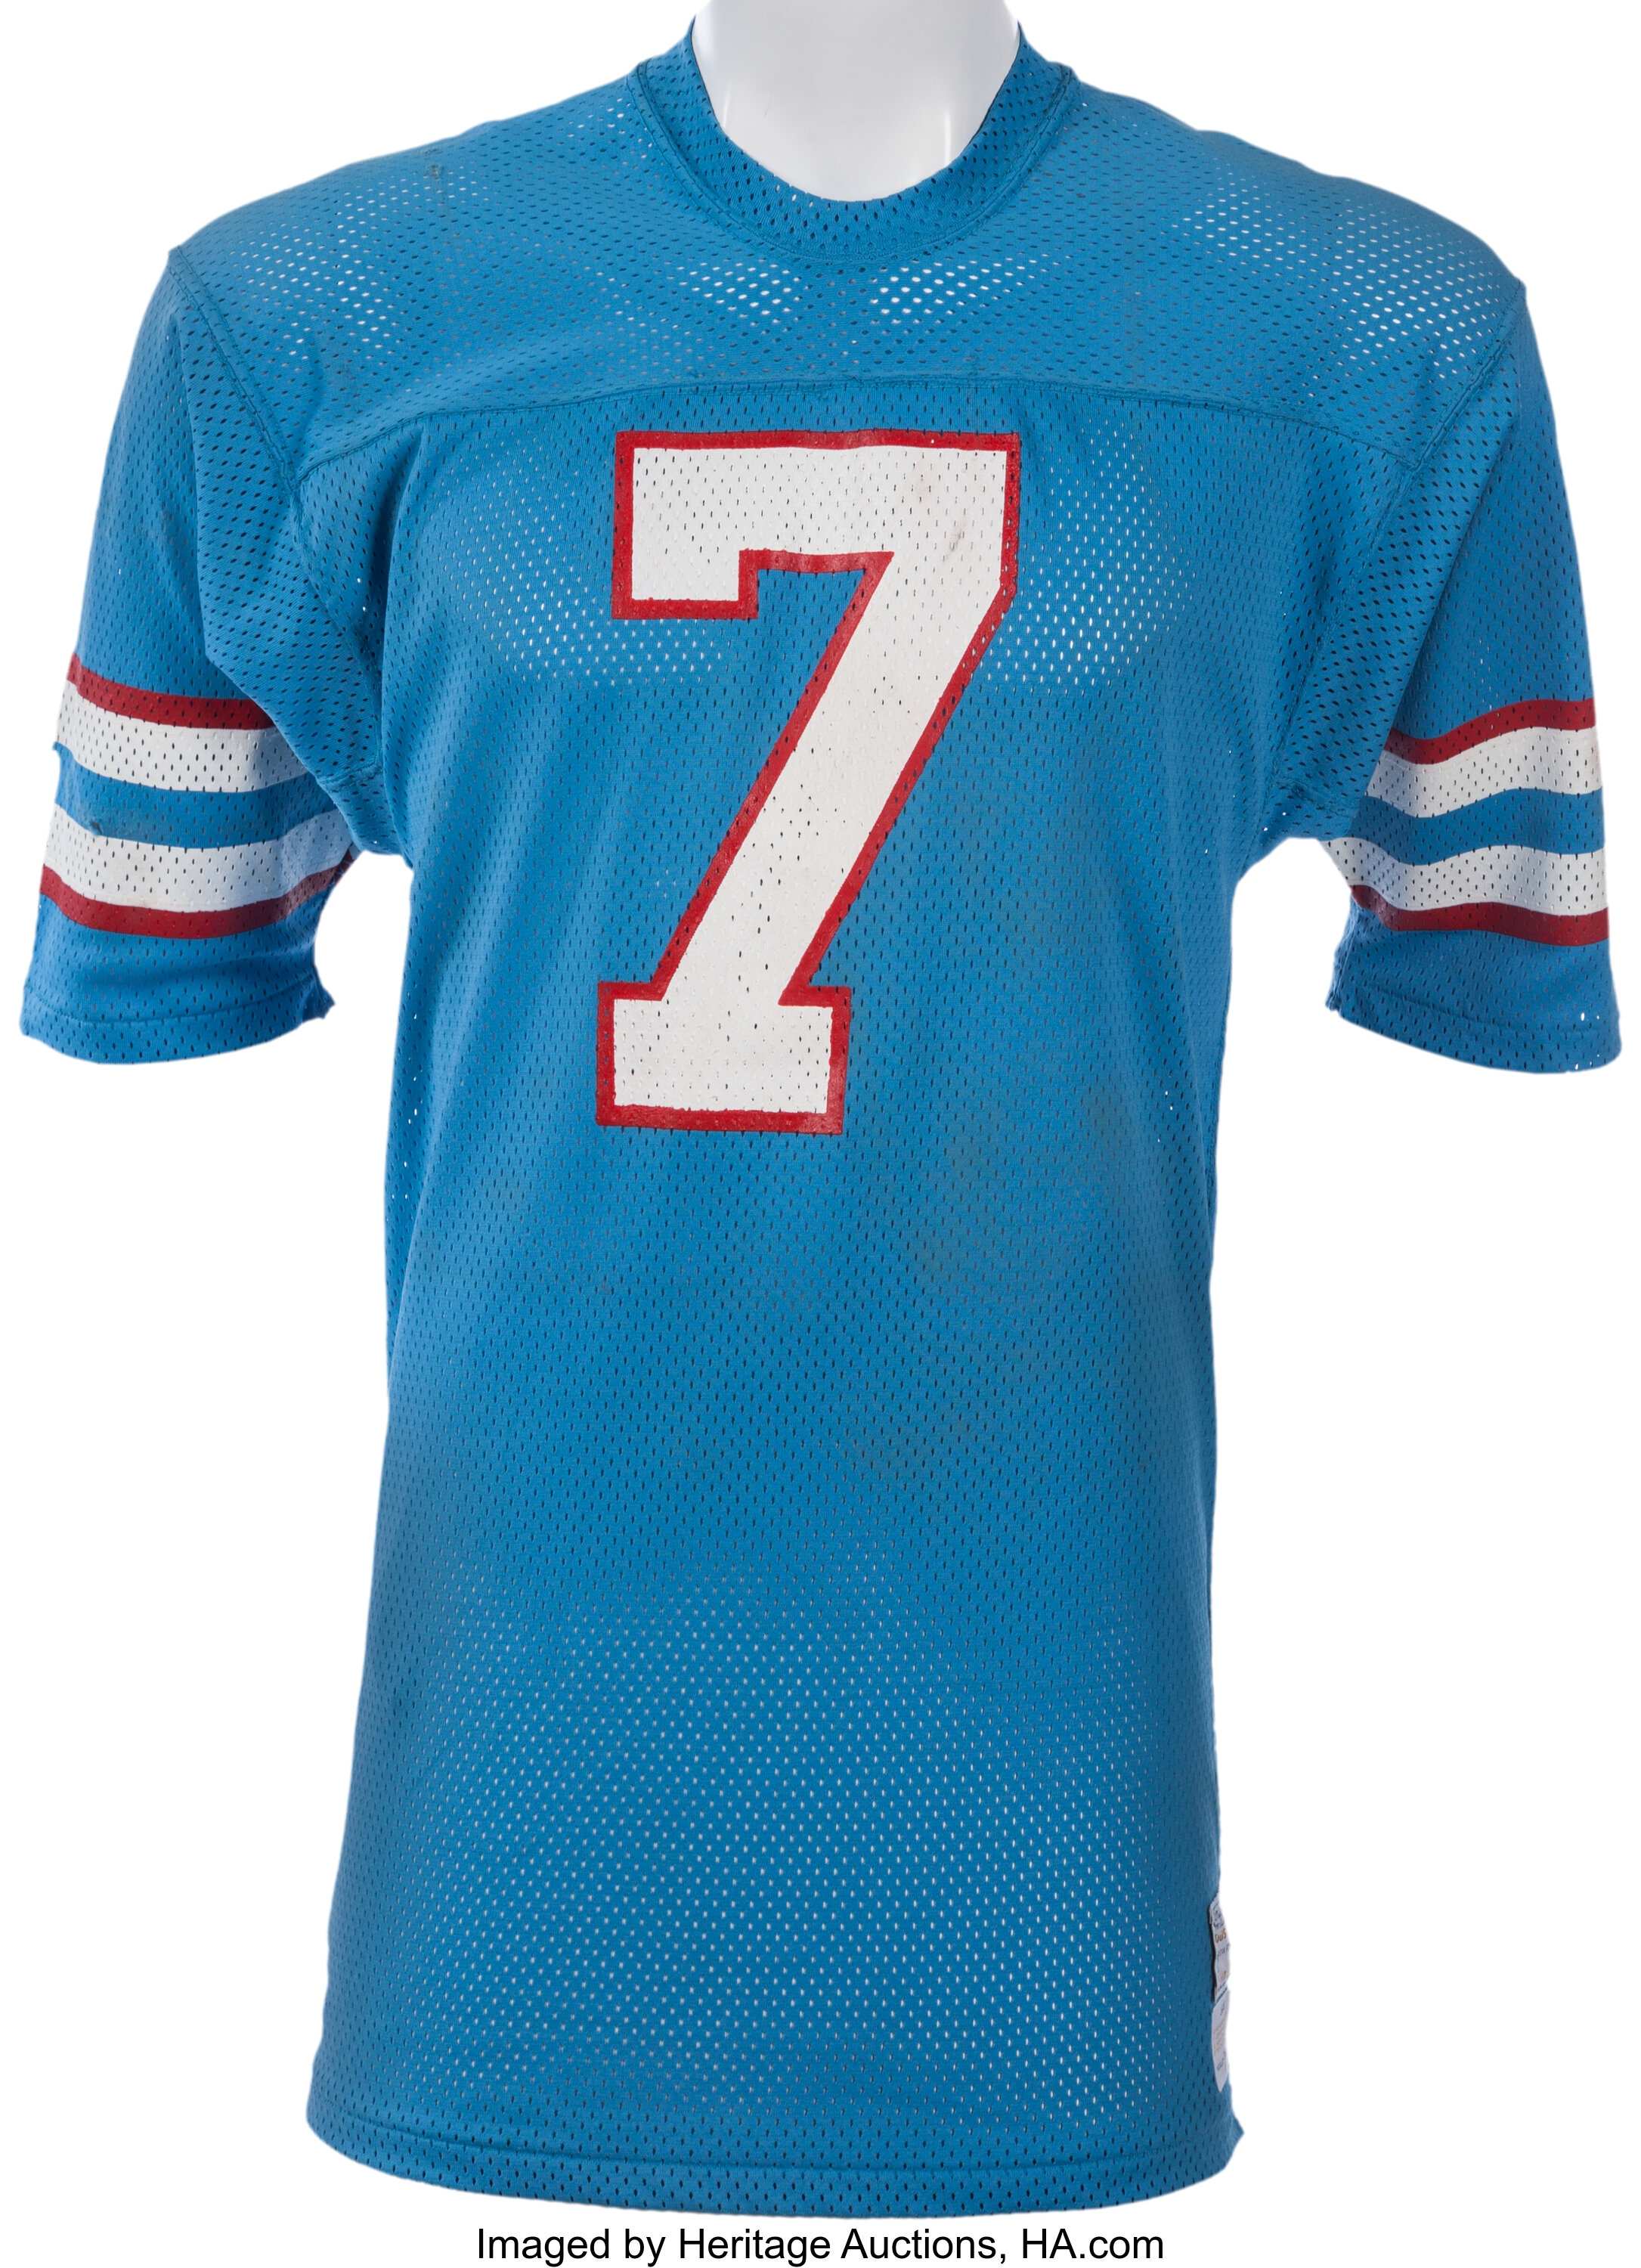 Houston to pay tribute to Oilers with commemorative uniforms - Footballscoop